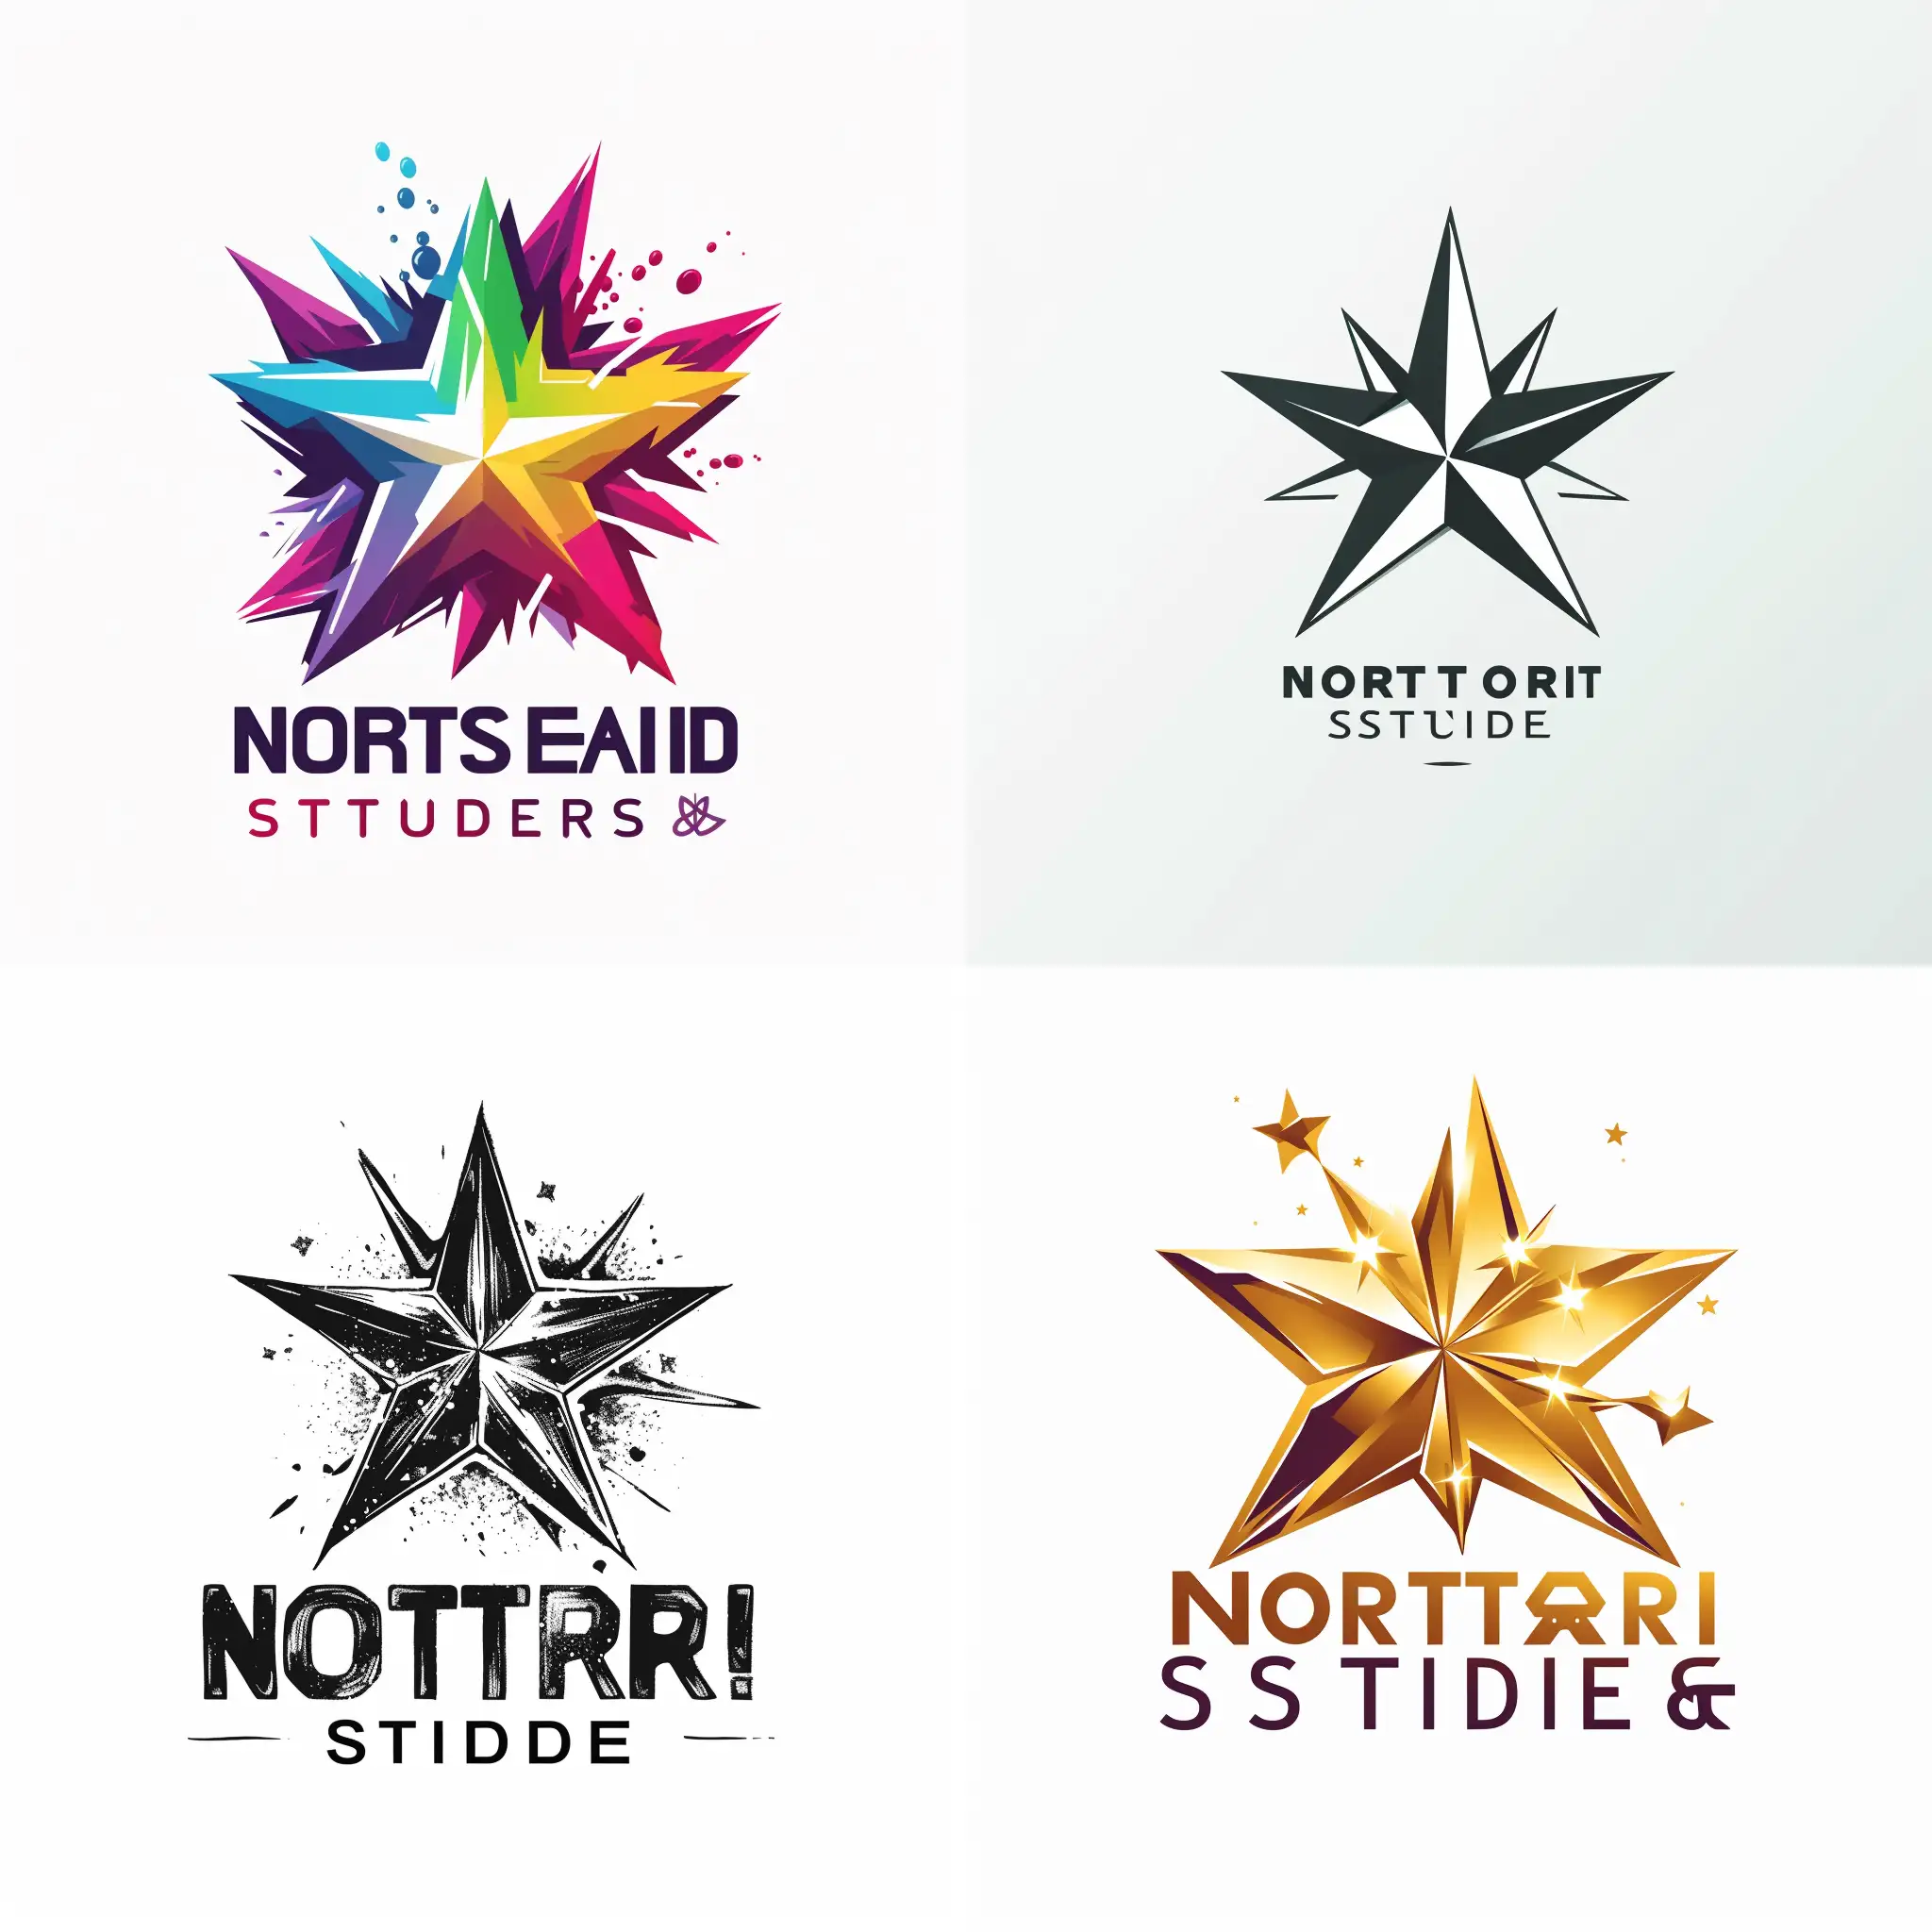 make me a logo for a marketing design company called North Star Studios with a white background be extremely creative about it